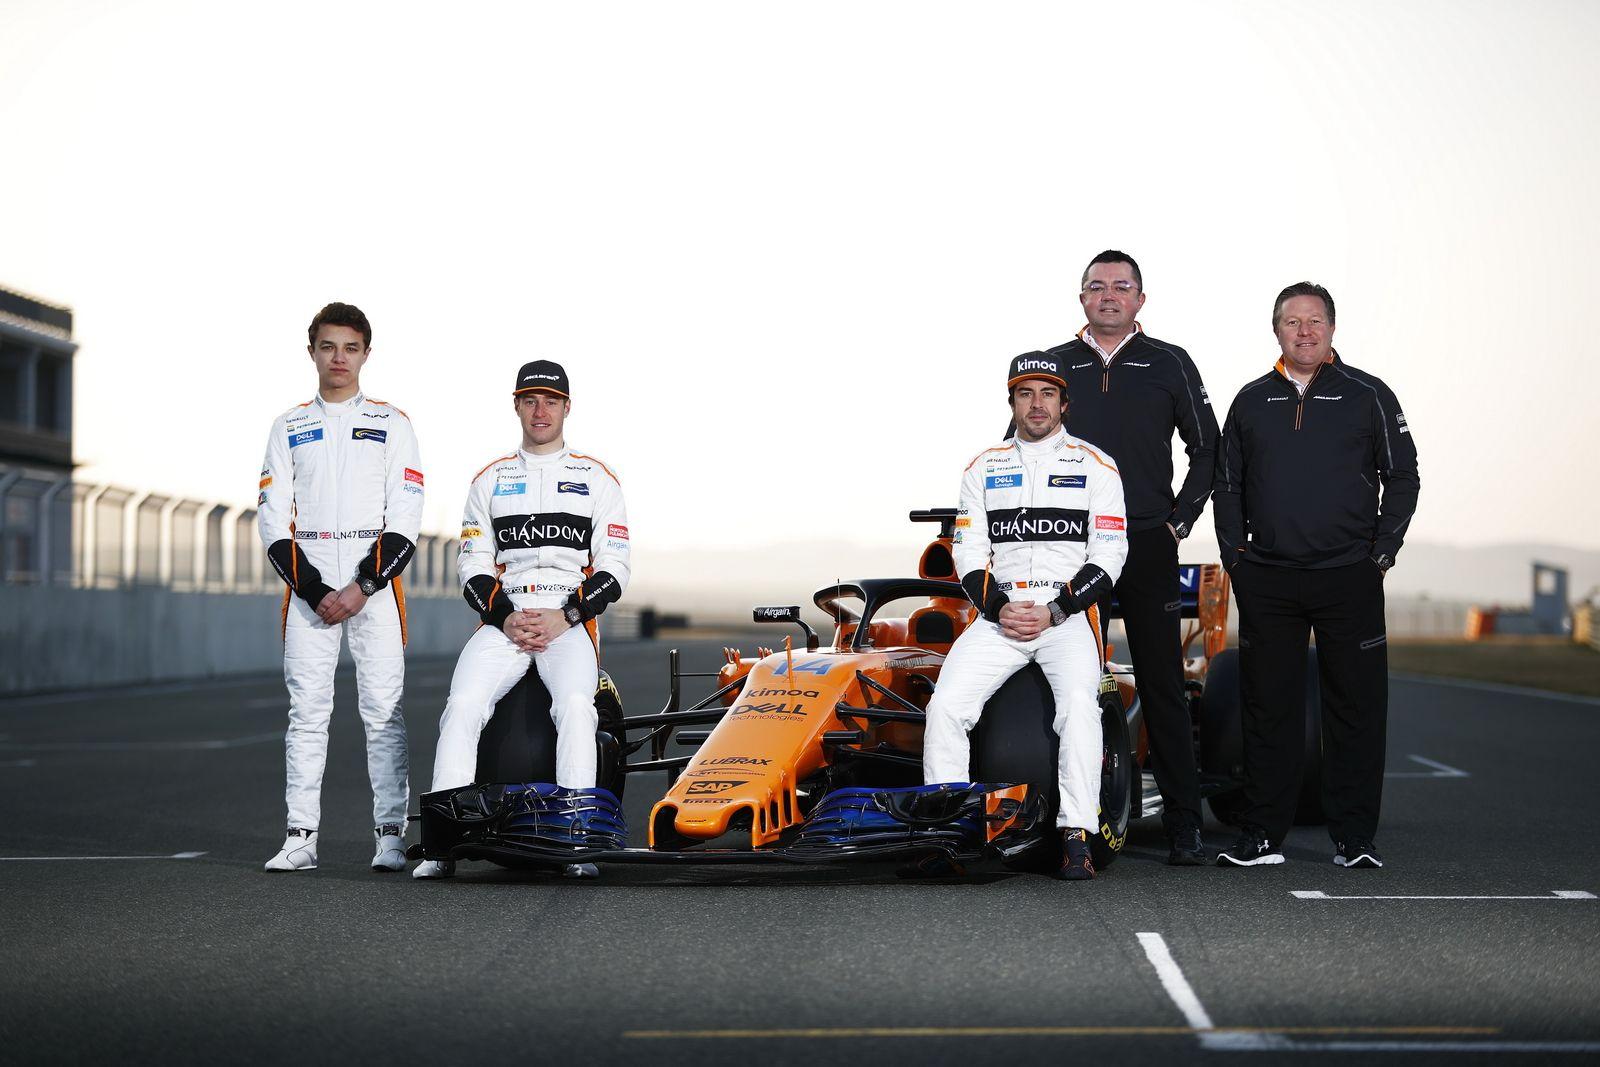 IMAGES AND VIDEO: McLAREN MCL33 TO ORIGIN